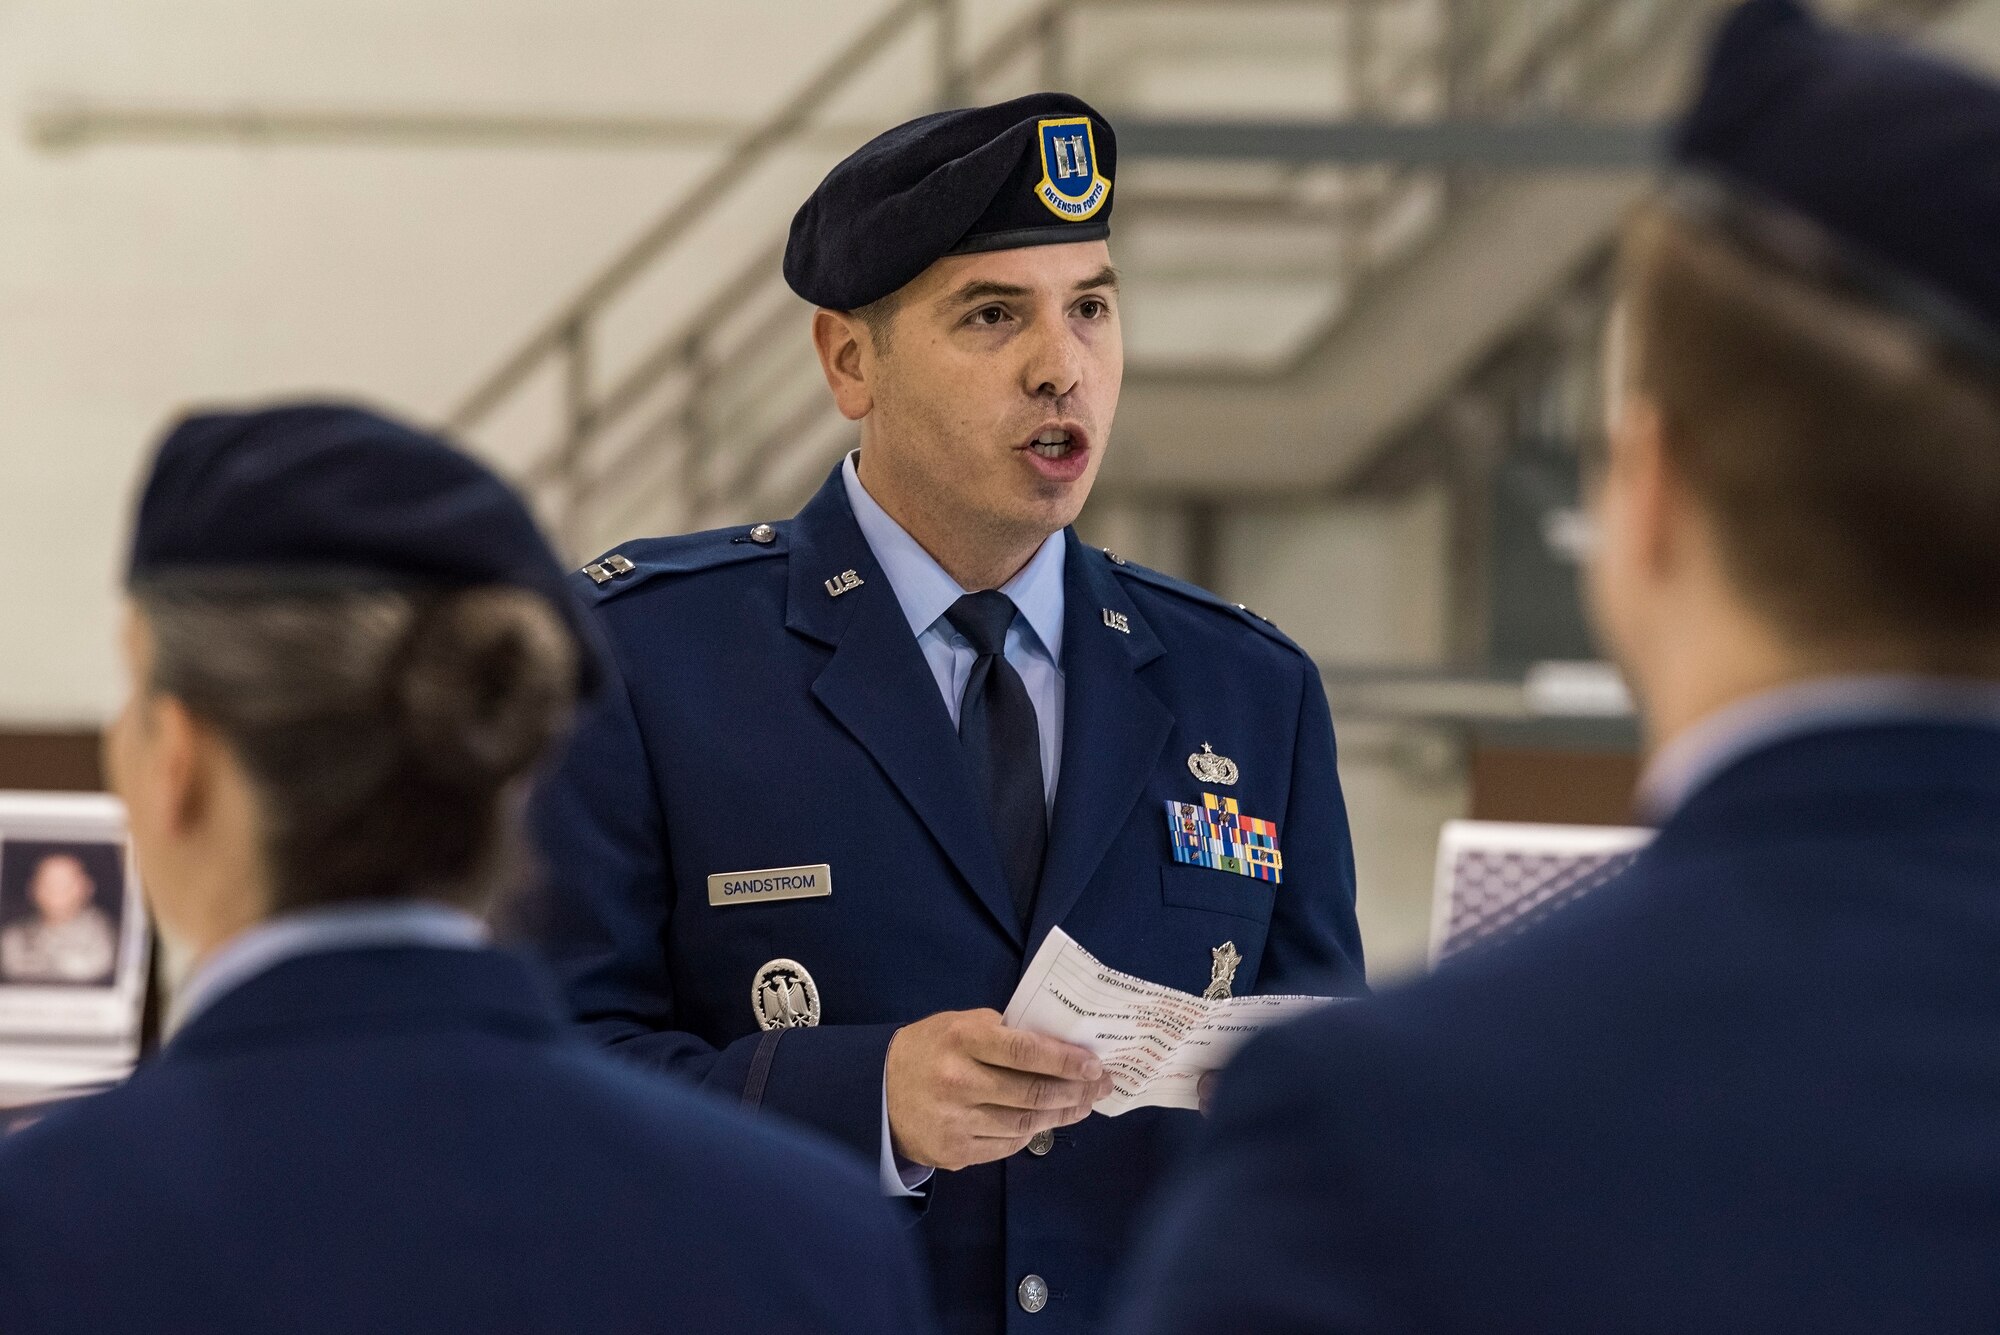 Capt. Jesse Sandstrom, 436th Security Forces Squadron operations officer, reads a duty roster in remembrance of 14 fallen Air Force security forces members May 18, 2018, during the National Police Week Remembrance Ceremony at Dover Air Force Base, Del. Sandstrom called out each name three times in succession prior to the emcee reading a brief narration of their untimely death in the line of duty. (U.S. Air Force photo by Roland Balik)